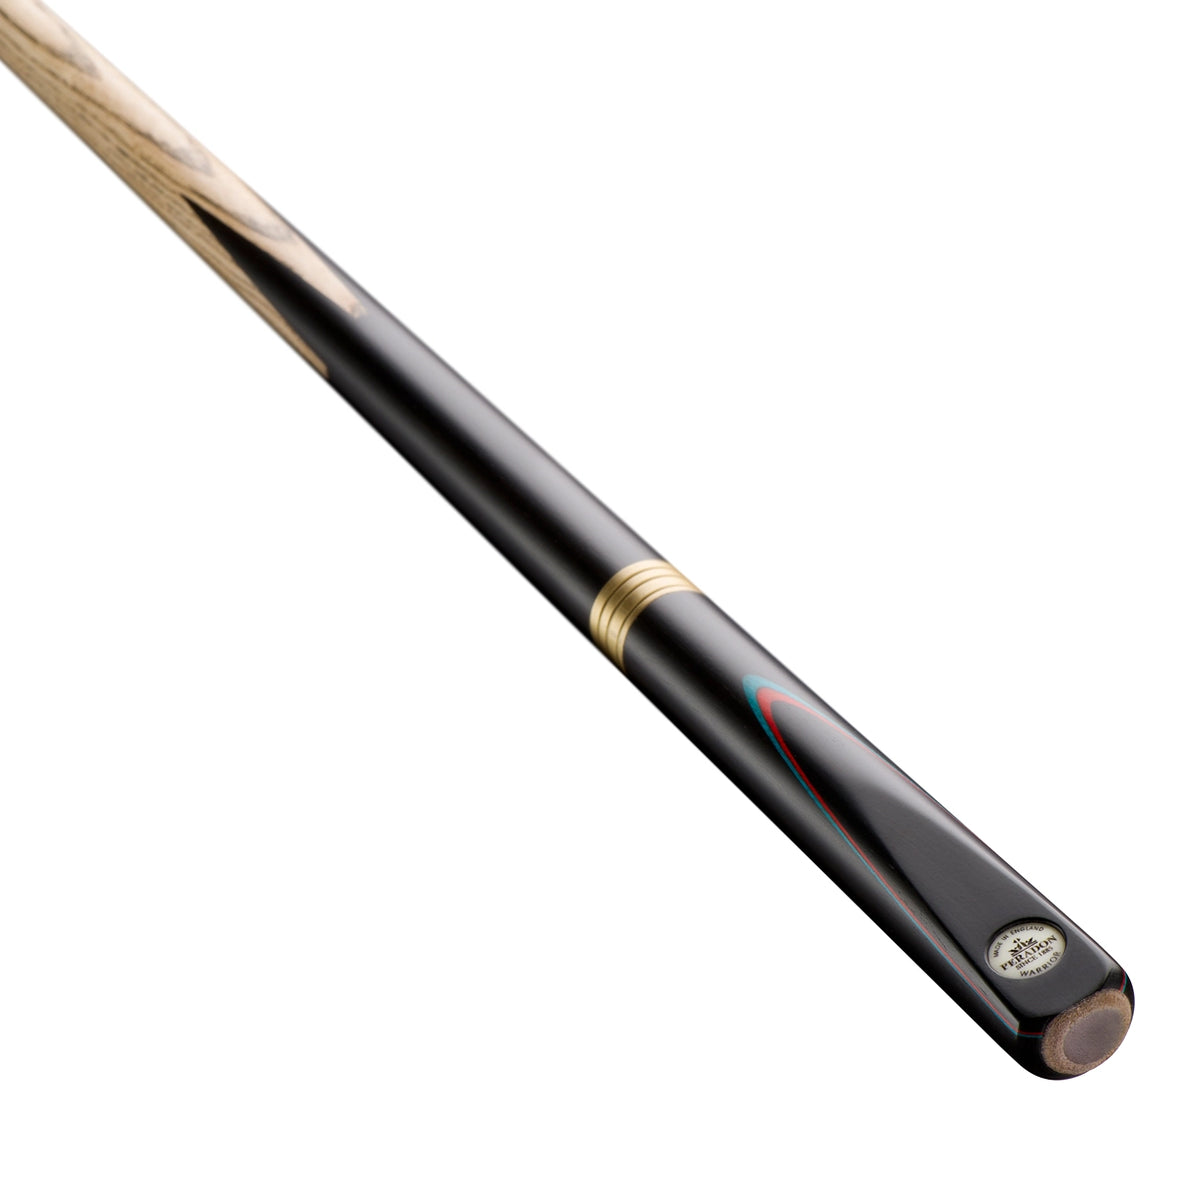 Peradon Warrior Three Section 8 Ball Pool Cue. On angle view